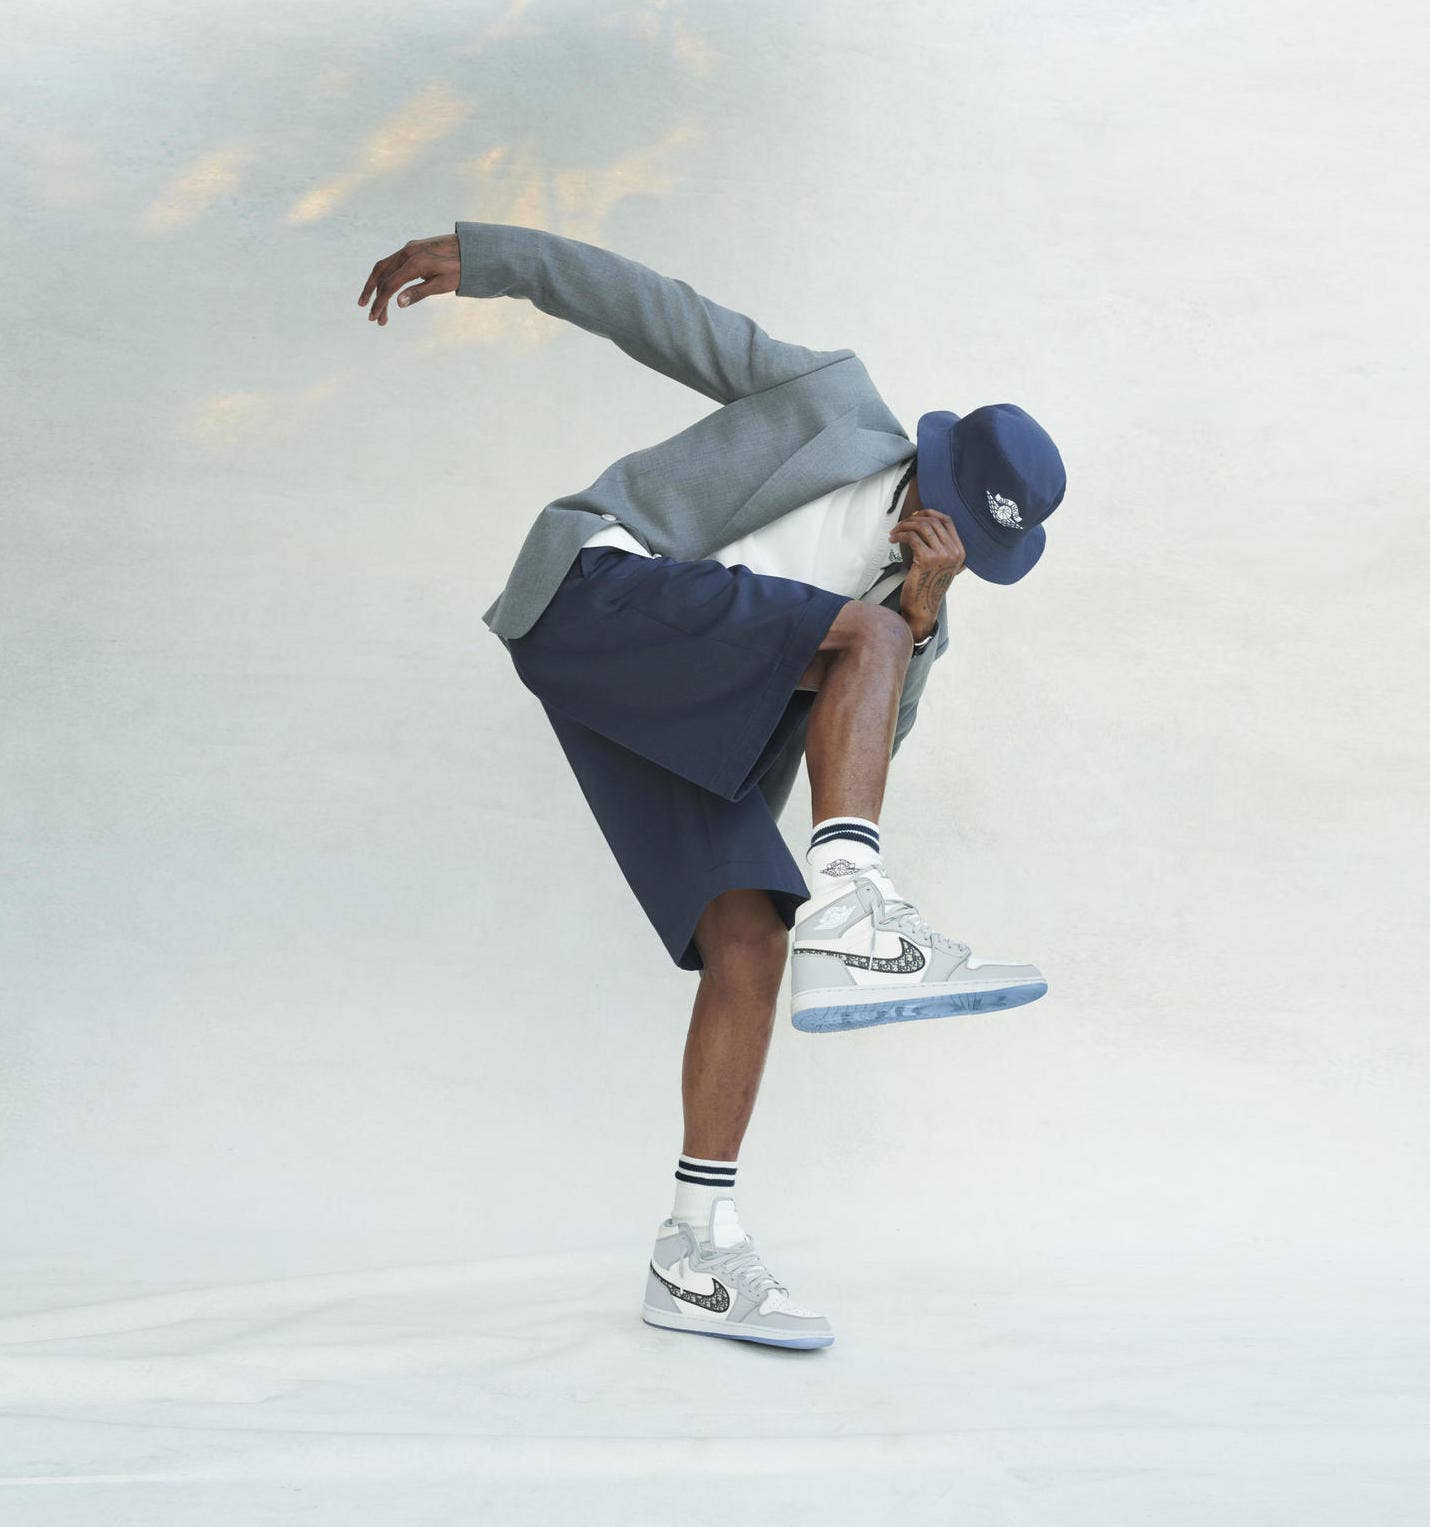 Dior Nike Air arrives at Selfridges: is this the future of sportswear?